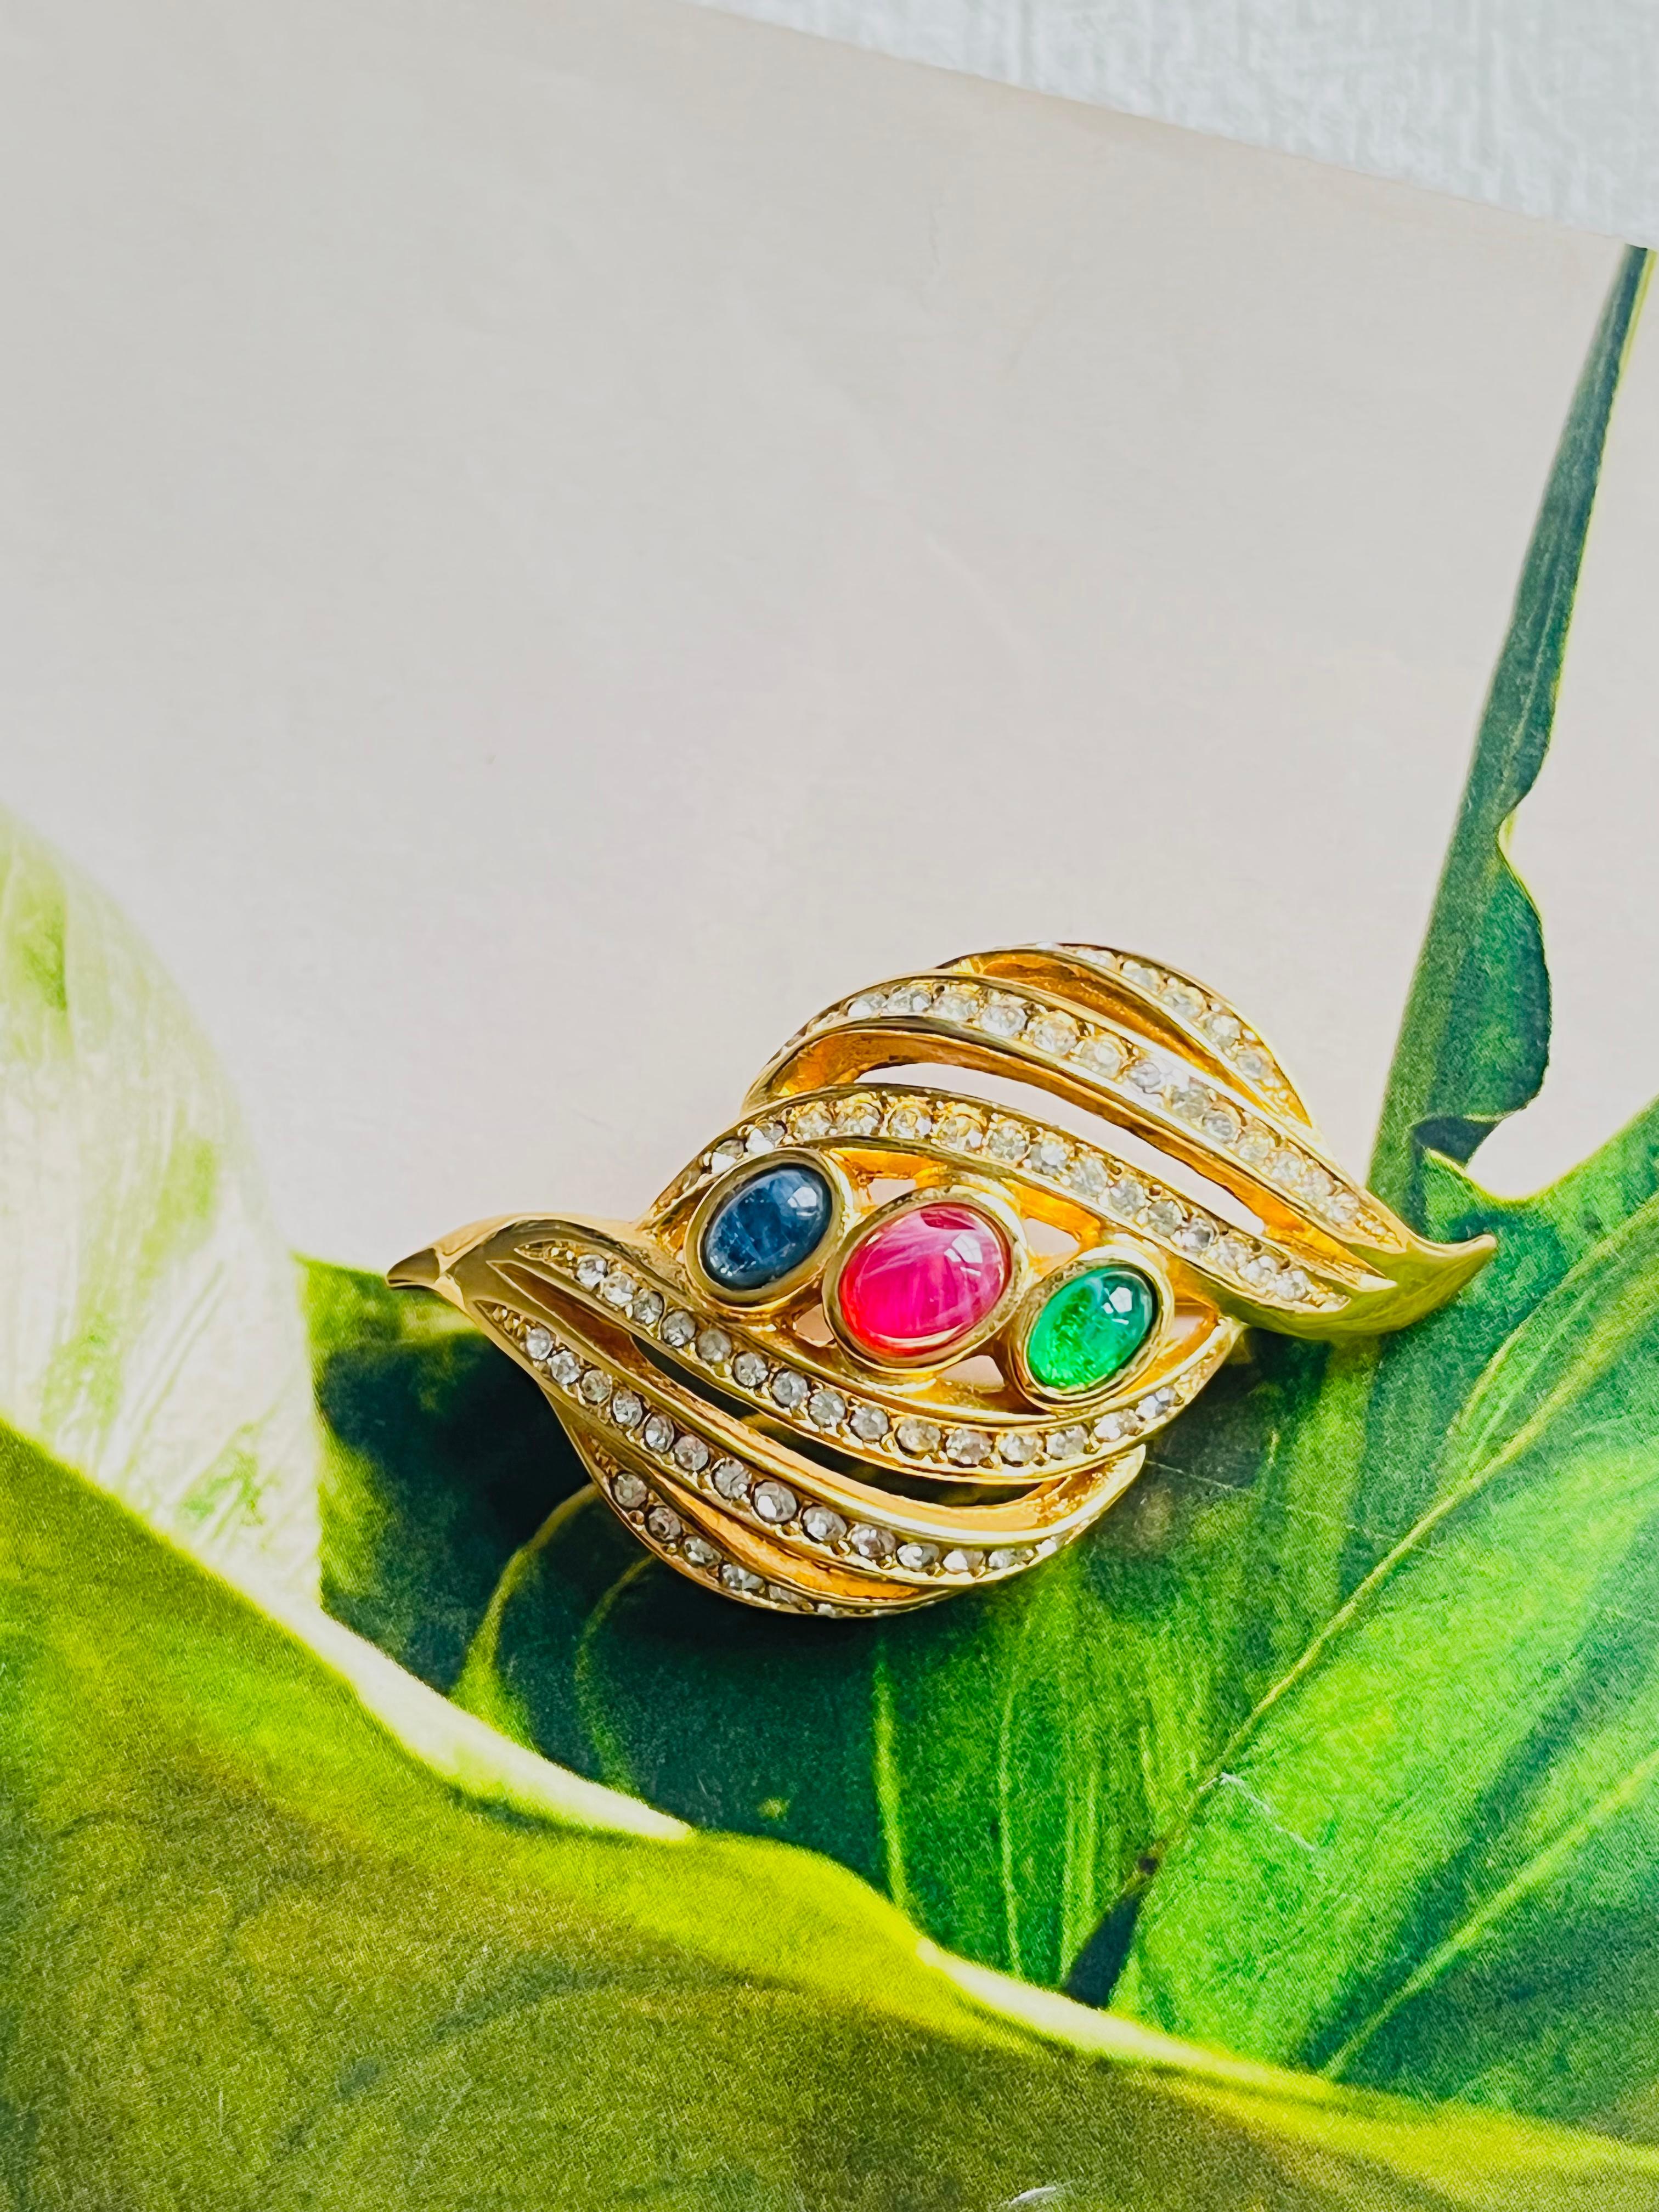 Christian Dior Vintage 1980s Gripoix Emerald Ruby Sapphire Shining Crystals Openwork Leaf Brooch, Gold Tone

Very good condition. Maybe light scratches or color loss, barely noticeable. Rare to find. 100% Genuine.

A unique piece. This is gold